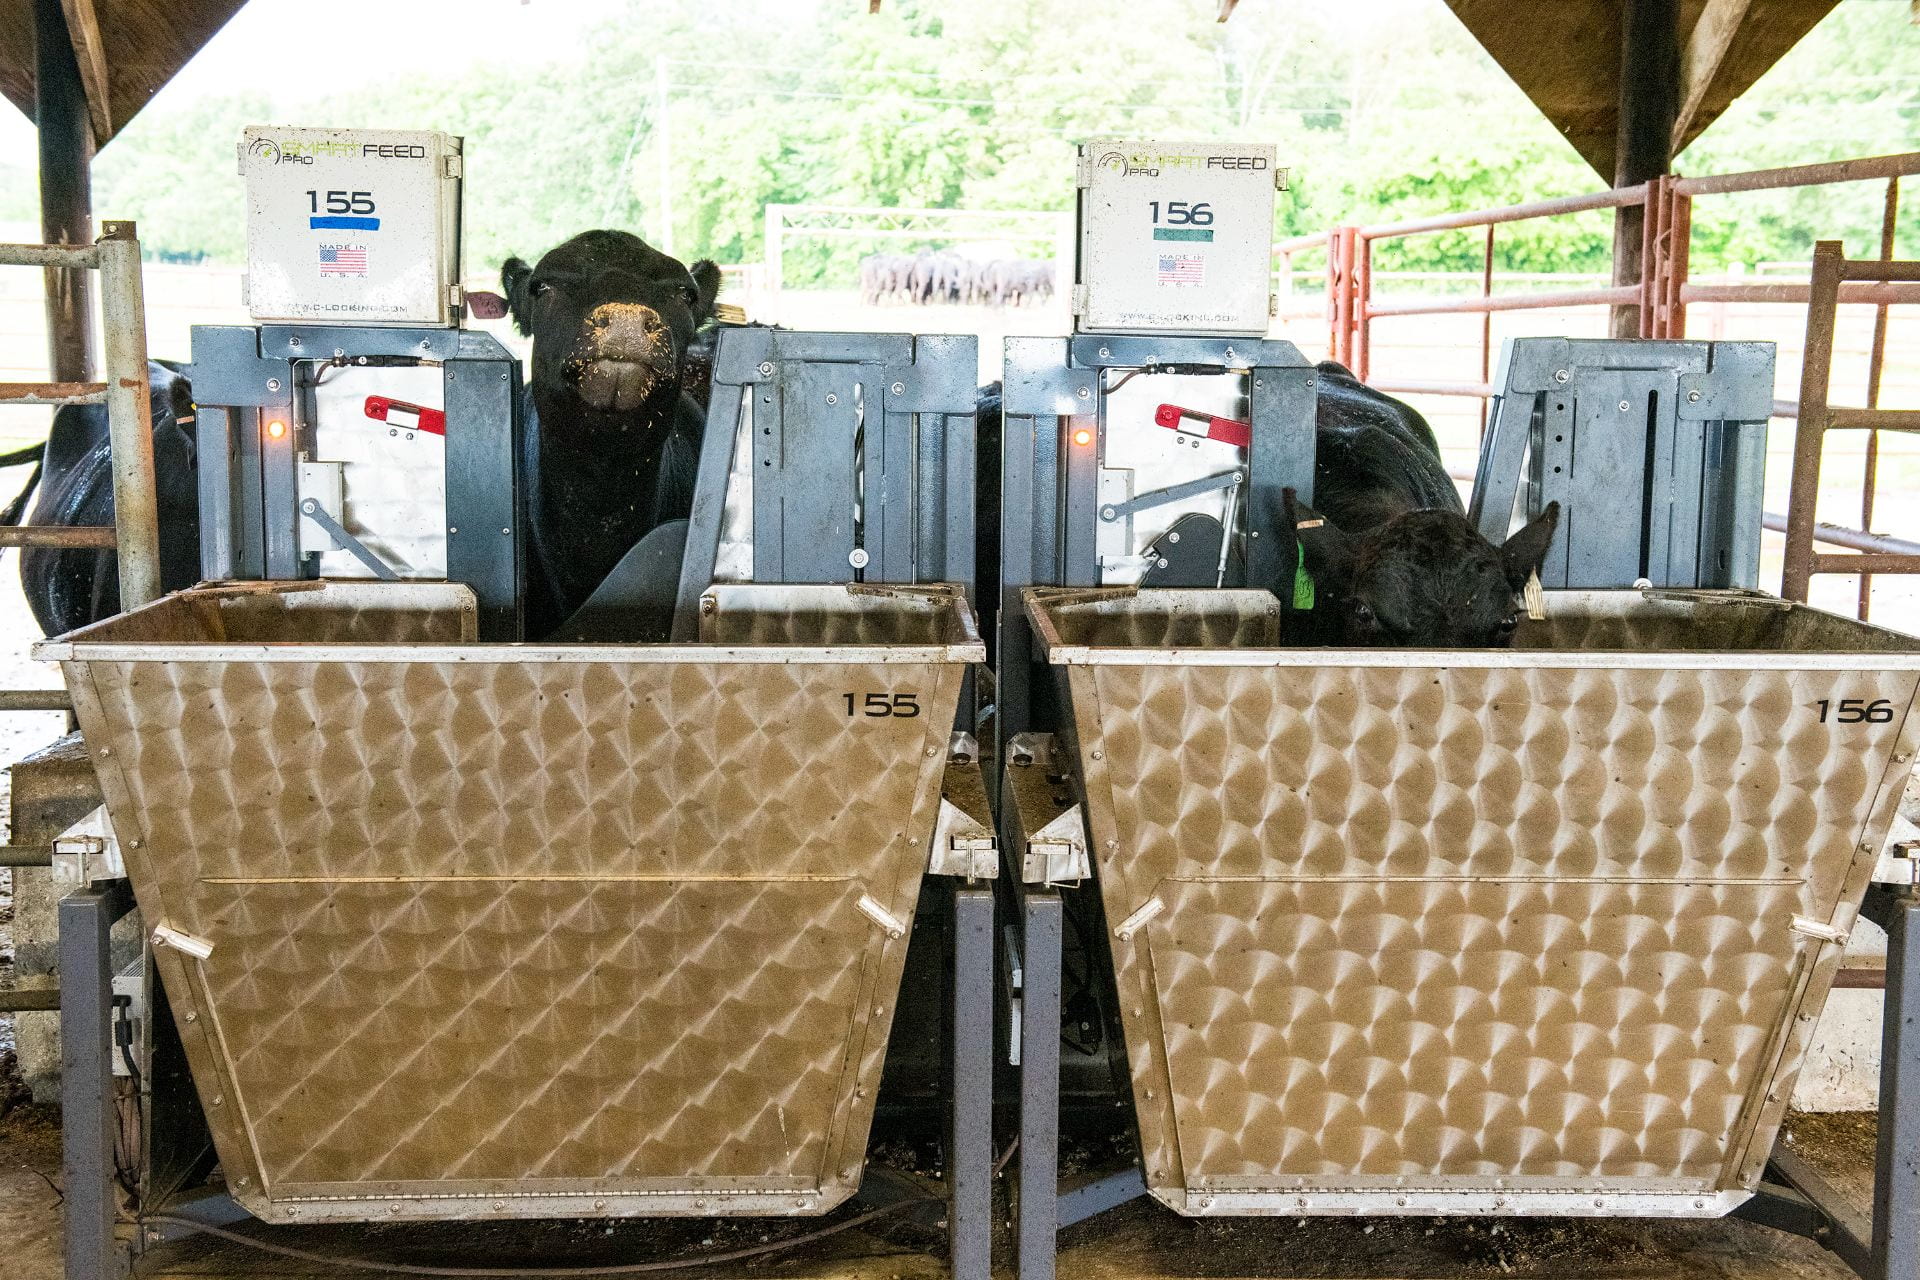 Two cows eat from bins on an automatic cattle feeder